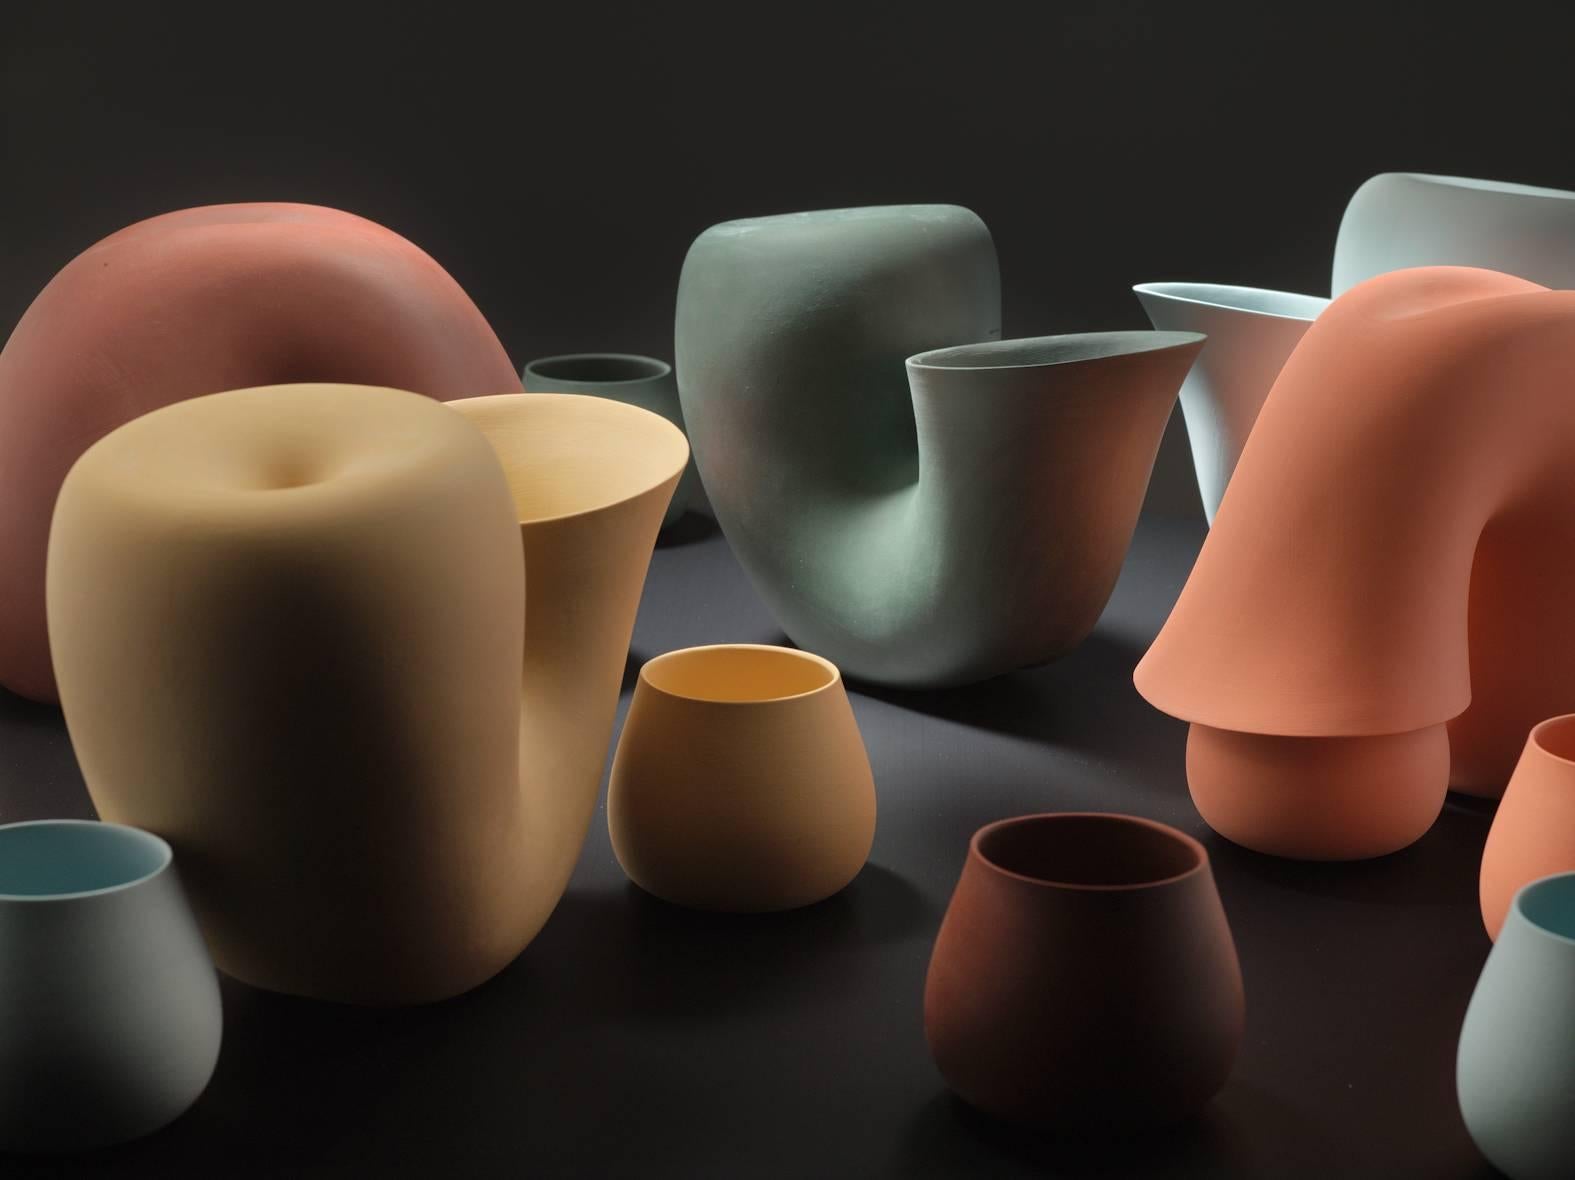 Les Ateliers Courbet presents the Particles Gallery collection.

Jug and cup.
by Aldo Bakker.

Artist statement:
‘My objects should be able to create a space around themselves, to define their context on their own. I question their meaning and,